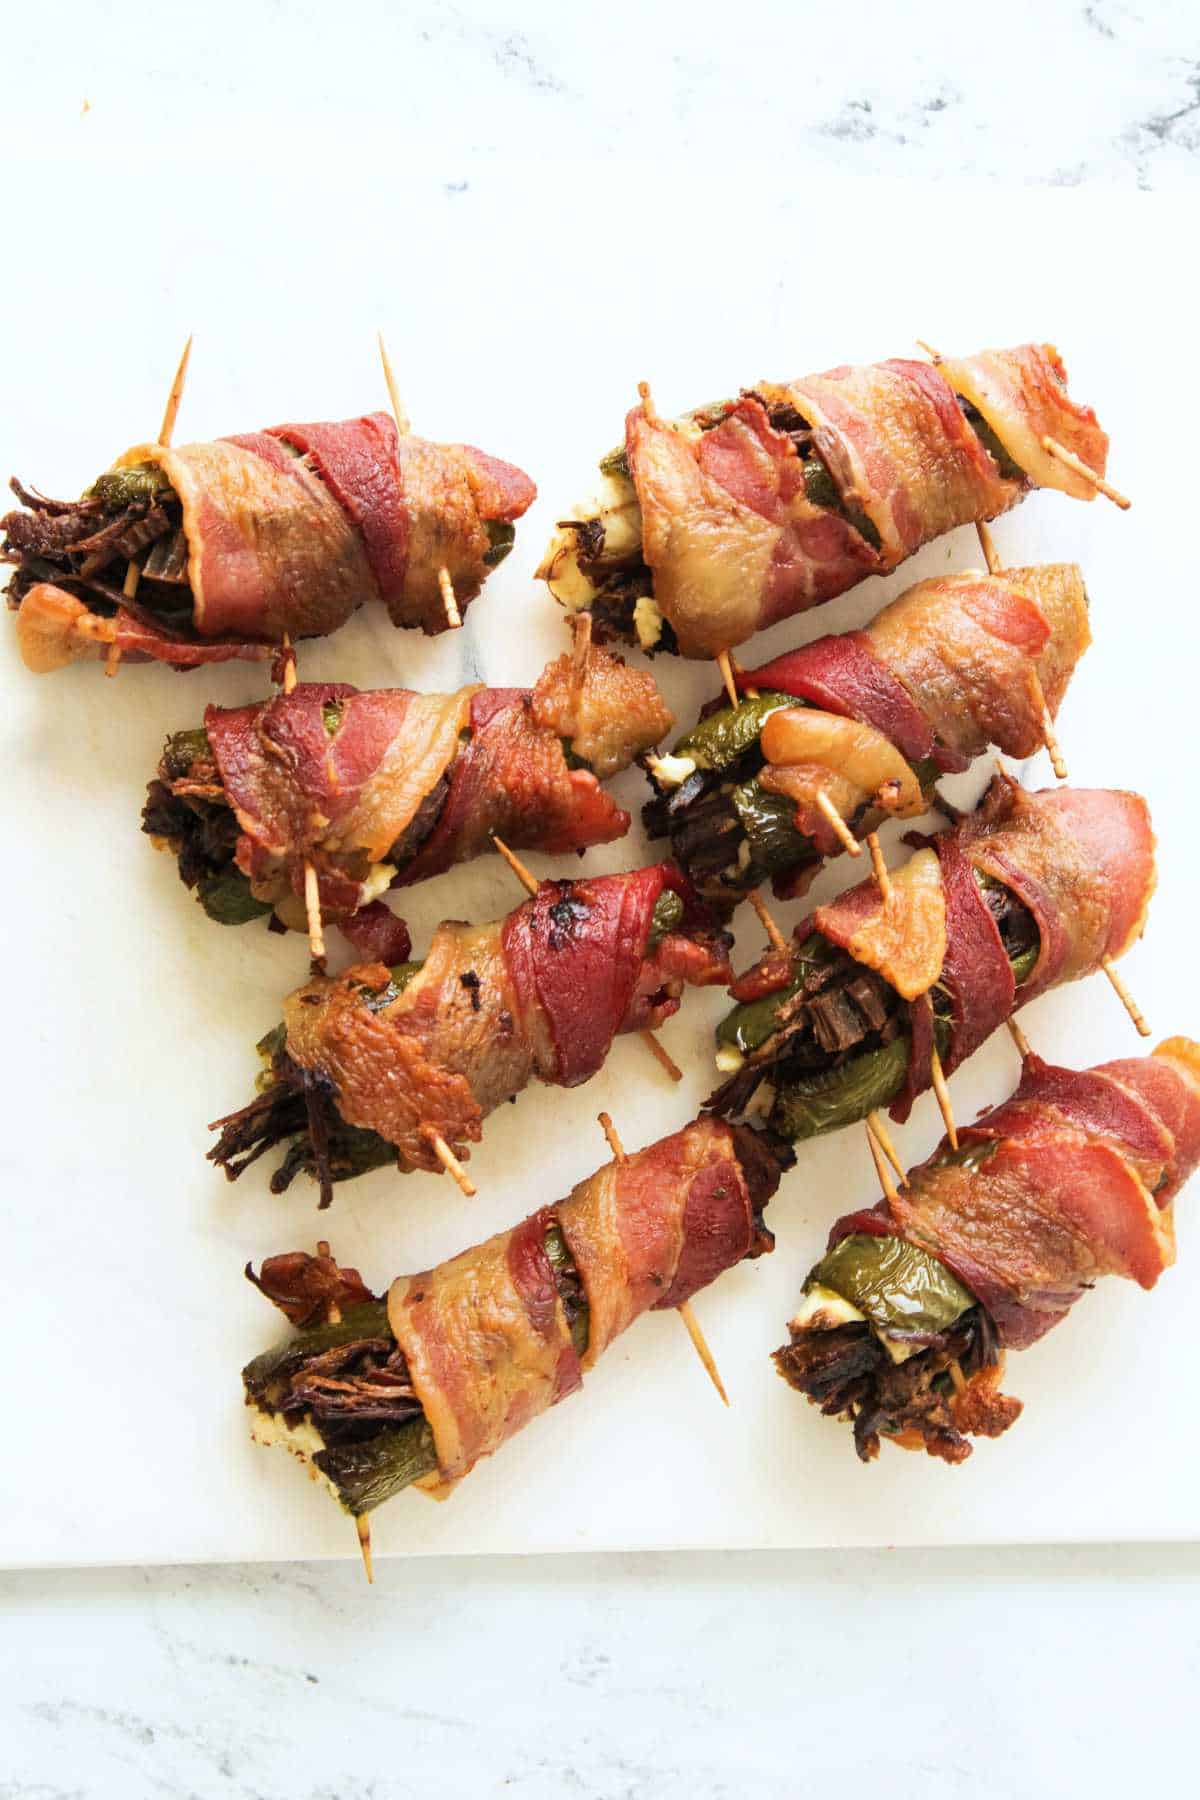 crisp bacon wrapped smoked stuffed jalapeno peppers.